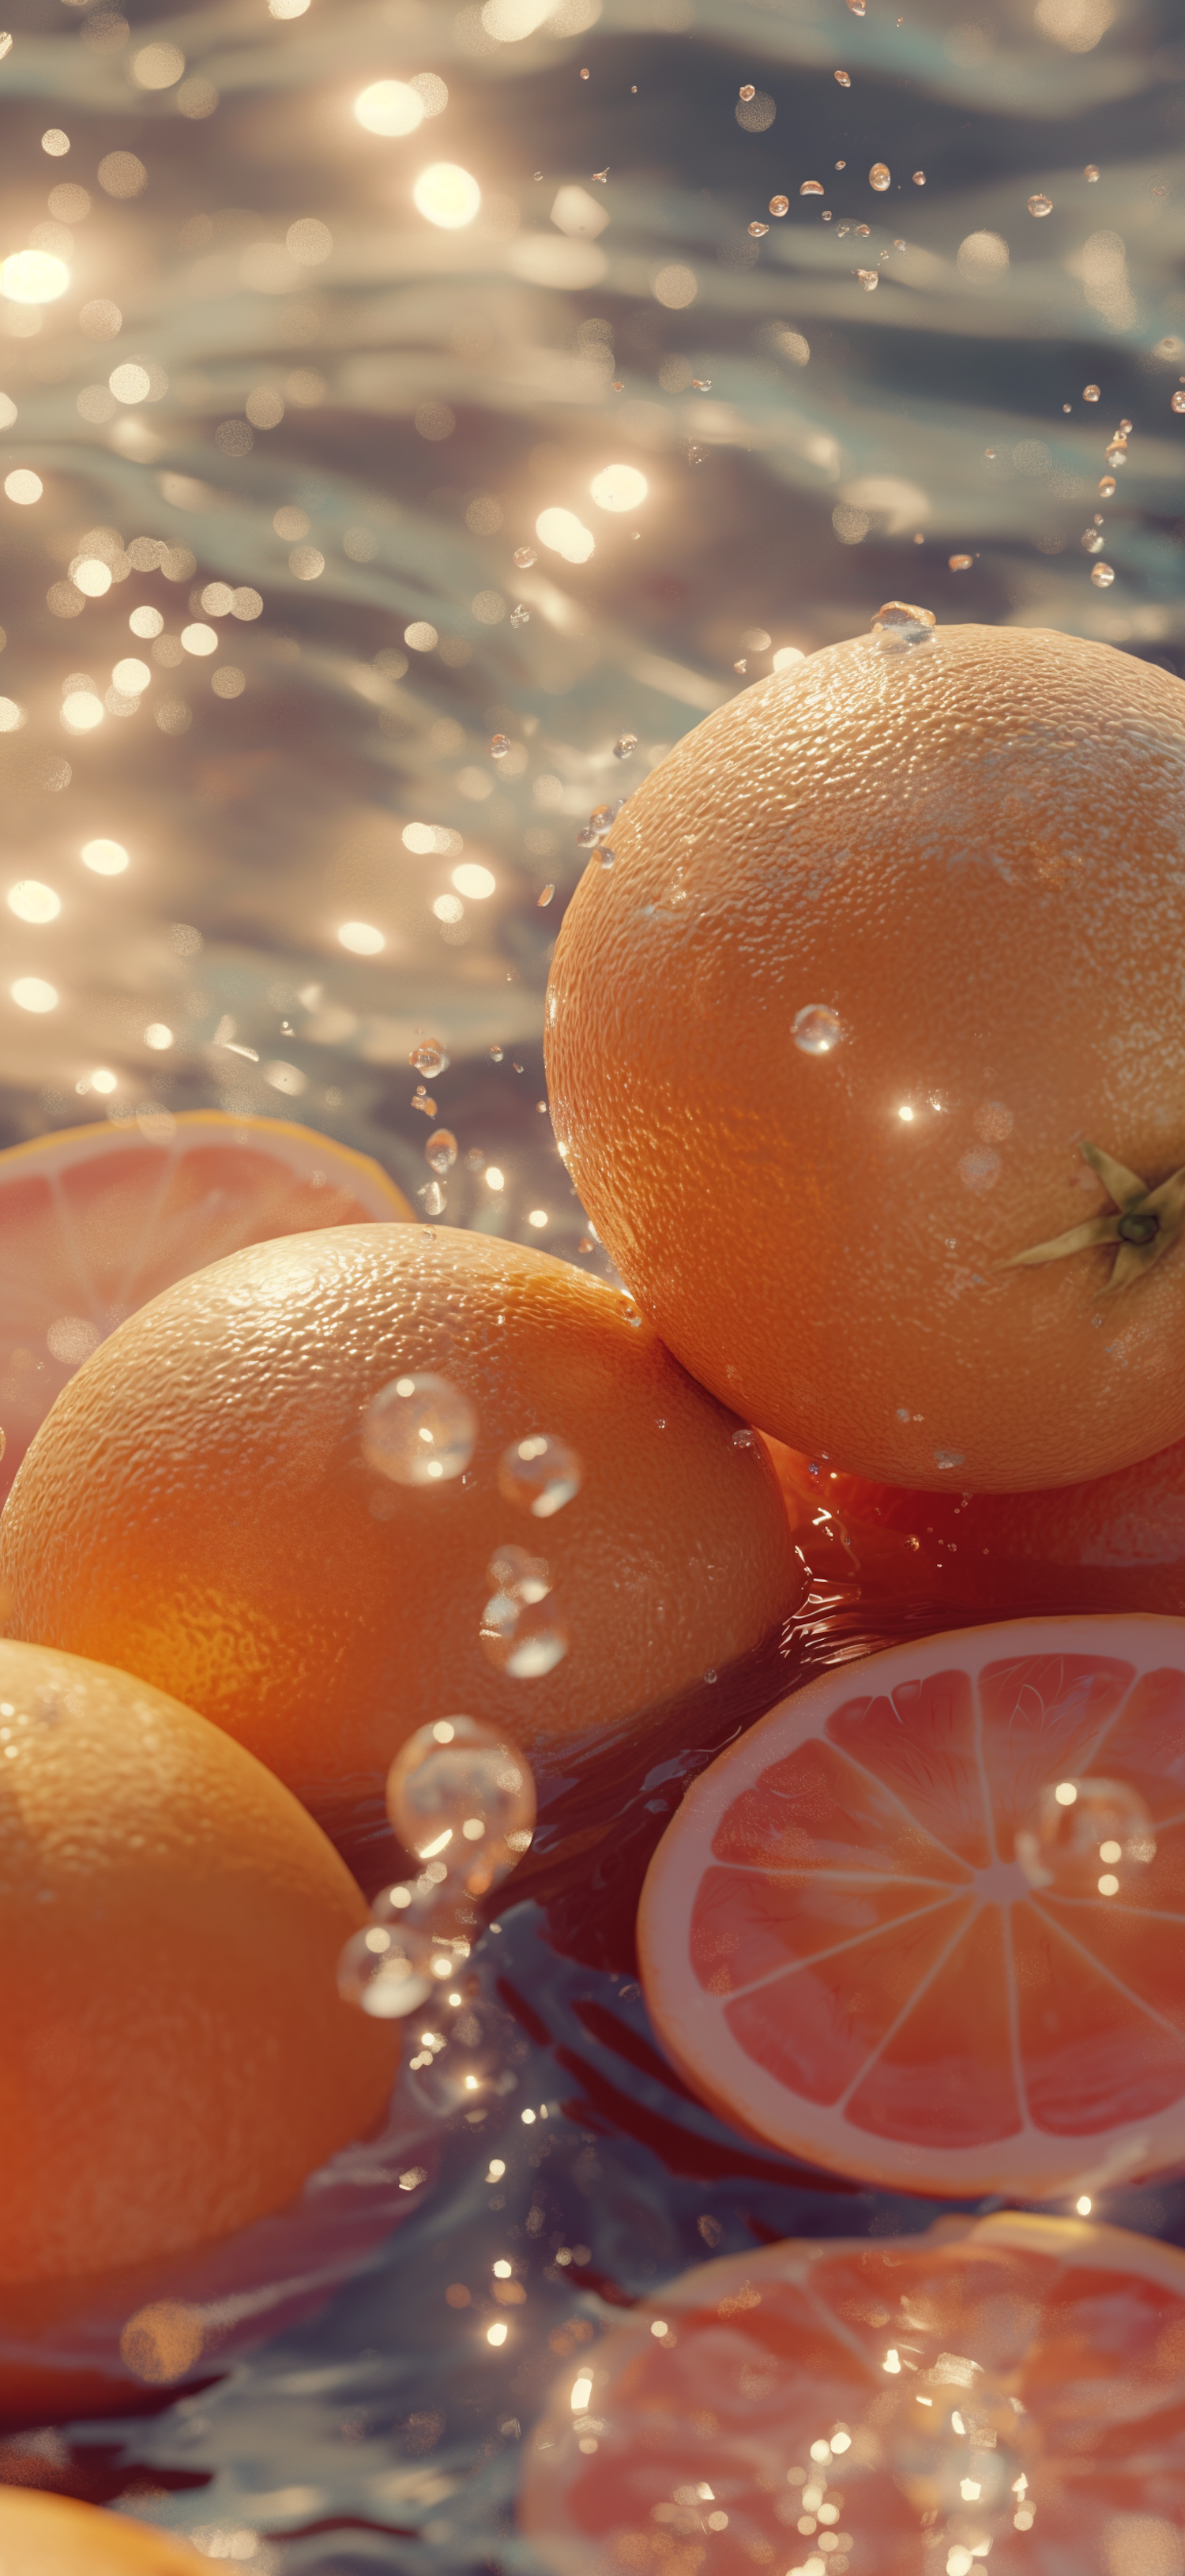 Submerged Oranges with Bubbles